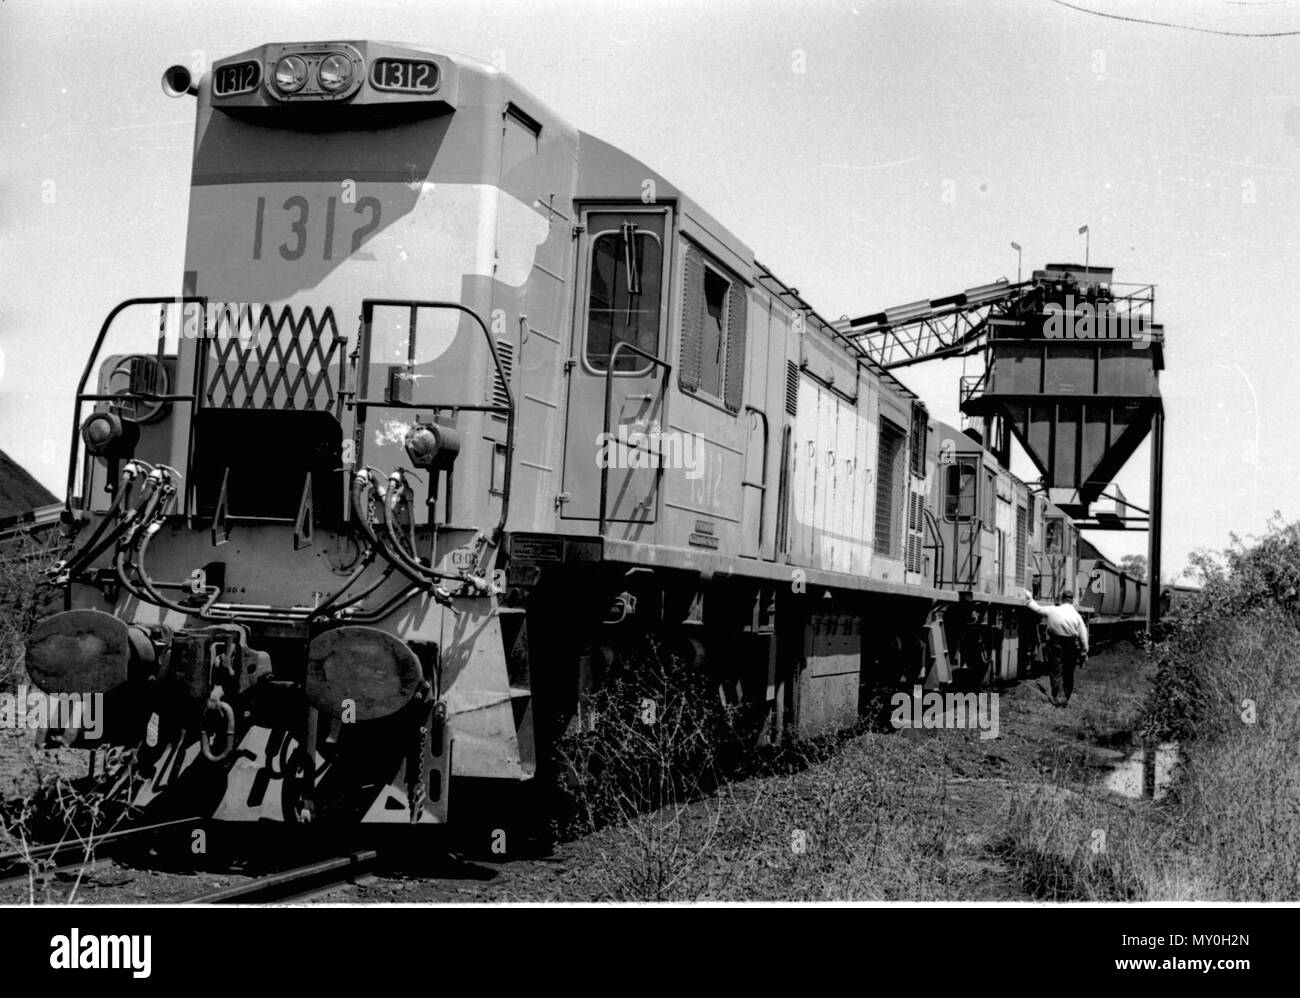 Coal train, Kinrola Mine, Blackwater, c 1971. have identified the location as Kinrola.  The 1300 class diesel locomotives were built by English Electric at Rocklea, Brisbane between 1967 and 1972 for use on the Blackwater and Moura coal lines and based at Gladstone. They were sold to the Australian National Railways in 1988 and shipped to Tasmania. Stock Photo